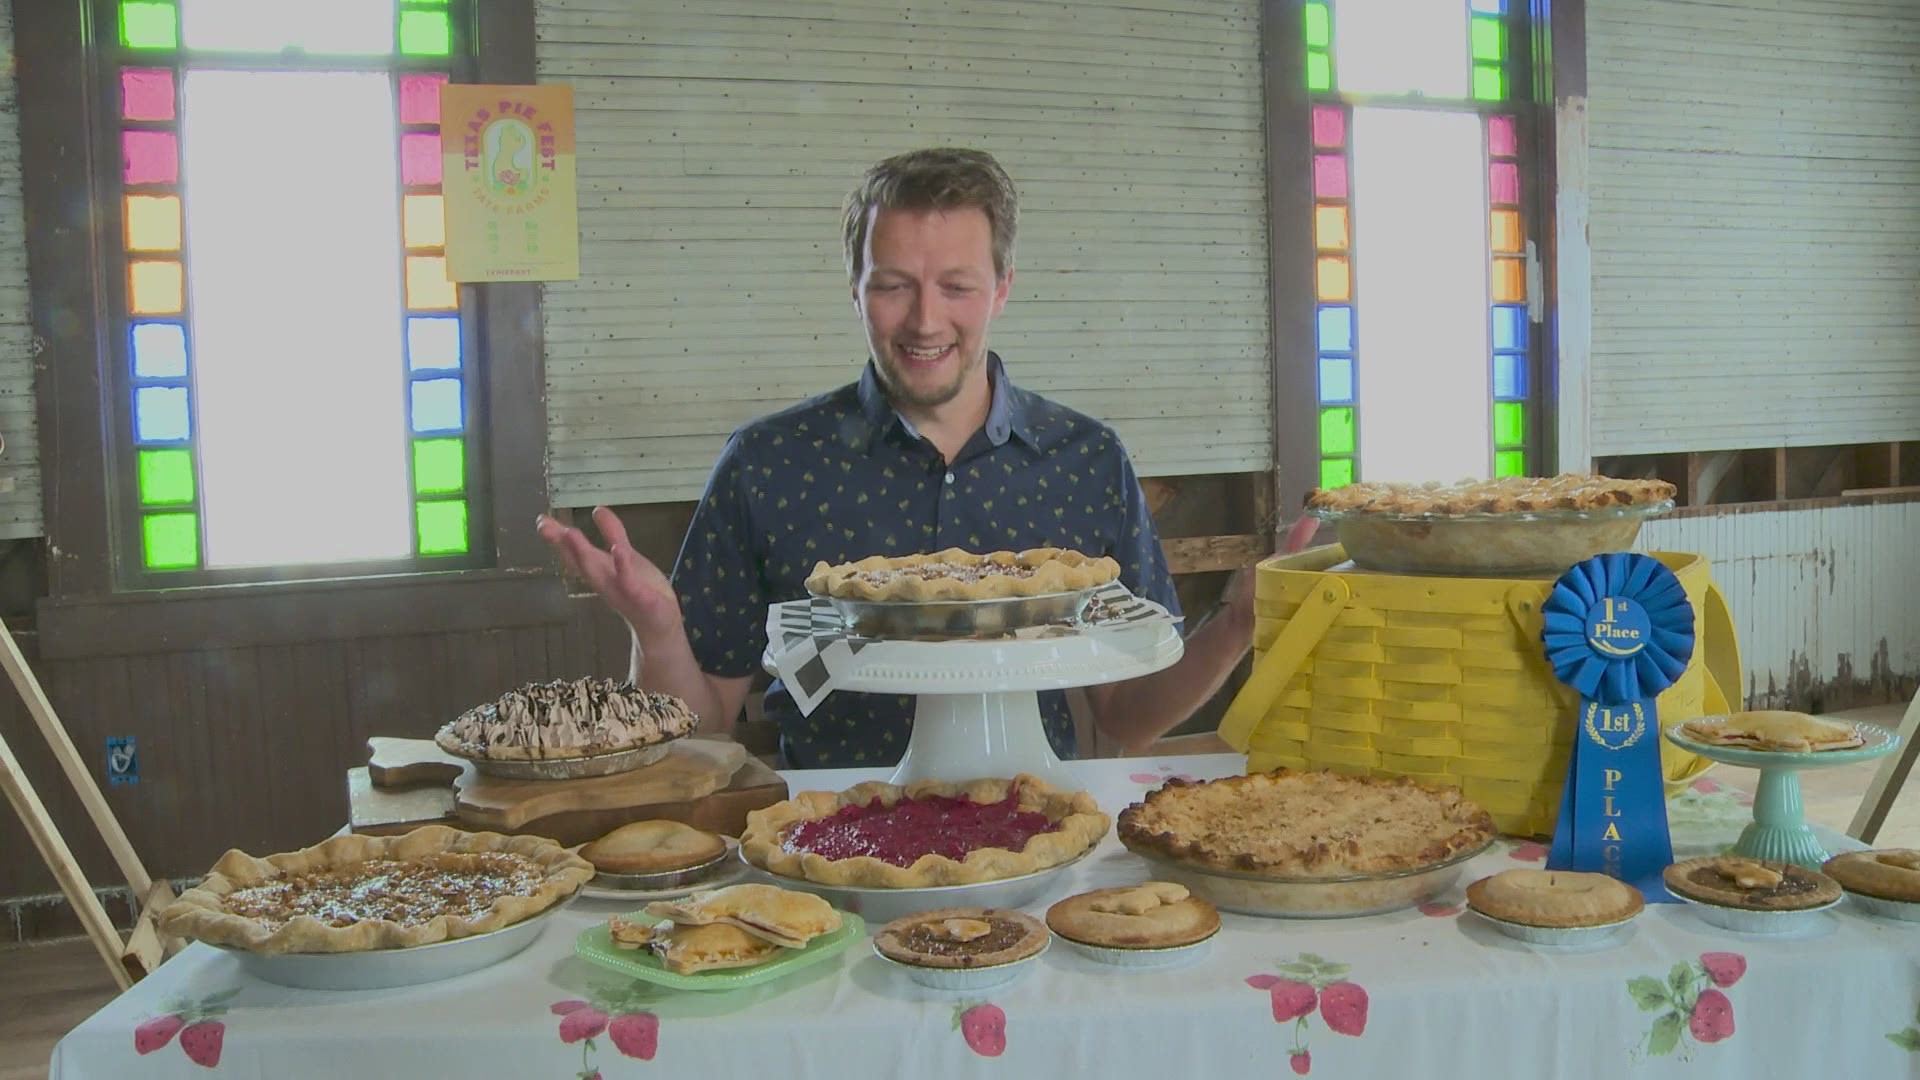 The first Texas Pie Fest was in 2019 and since the pandemic wiped it out in 2020, they’re making this one bigger than before.